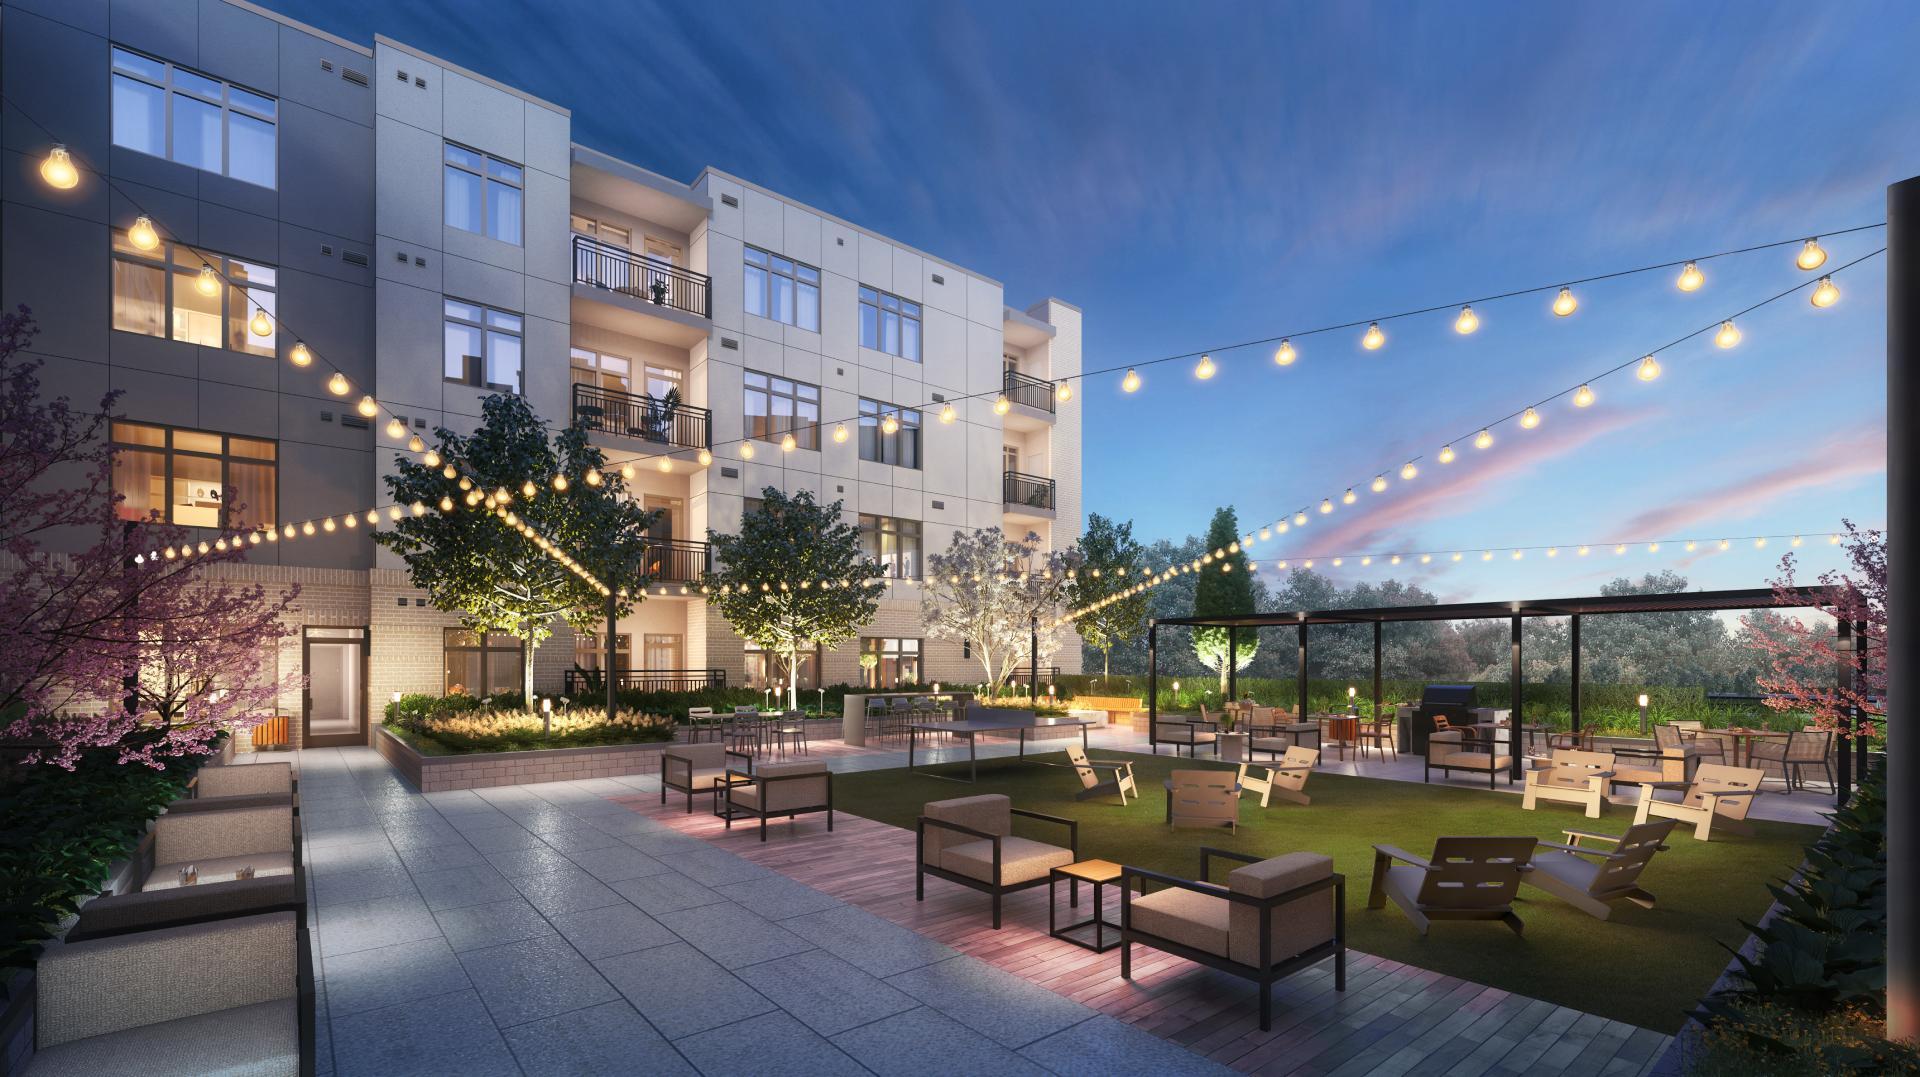 A rendering of sunset on the inner Coulter Place courtyard, with lounge seating under the market lights